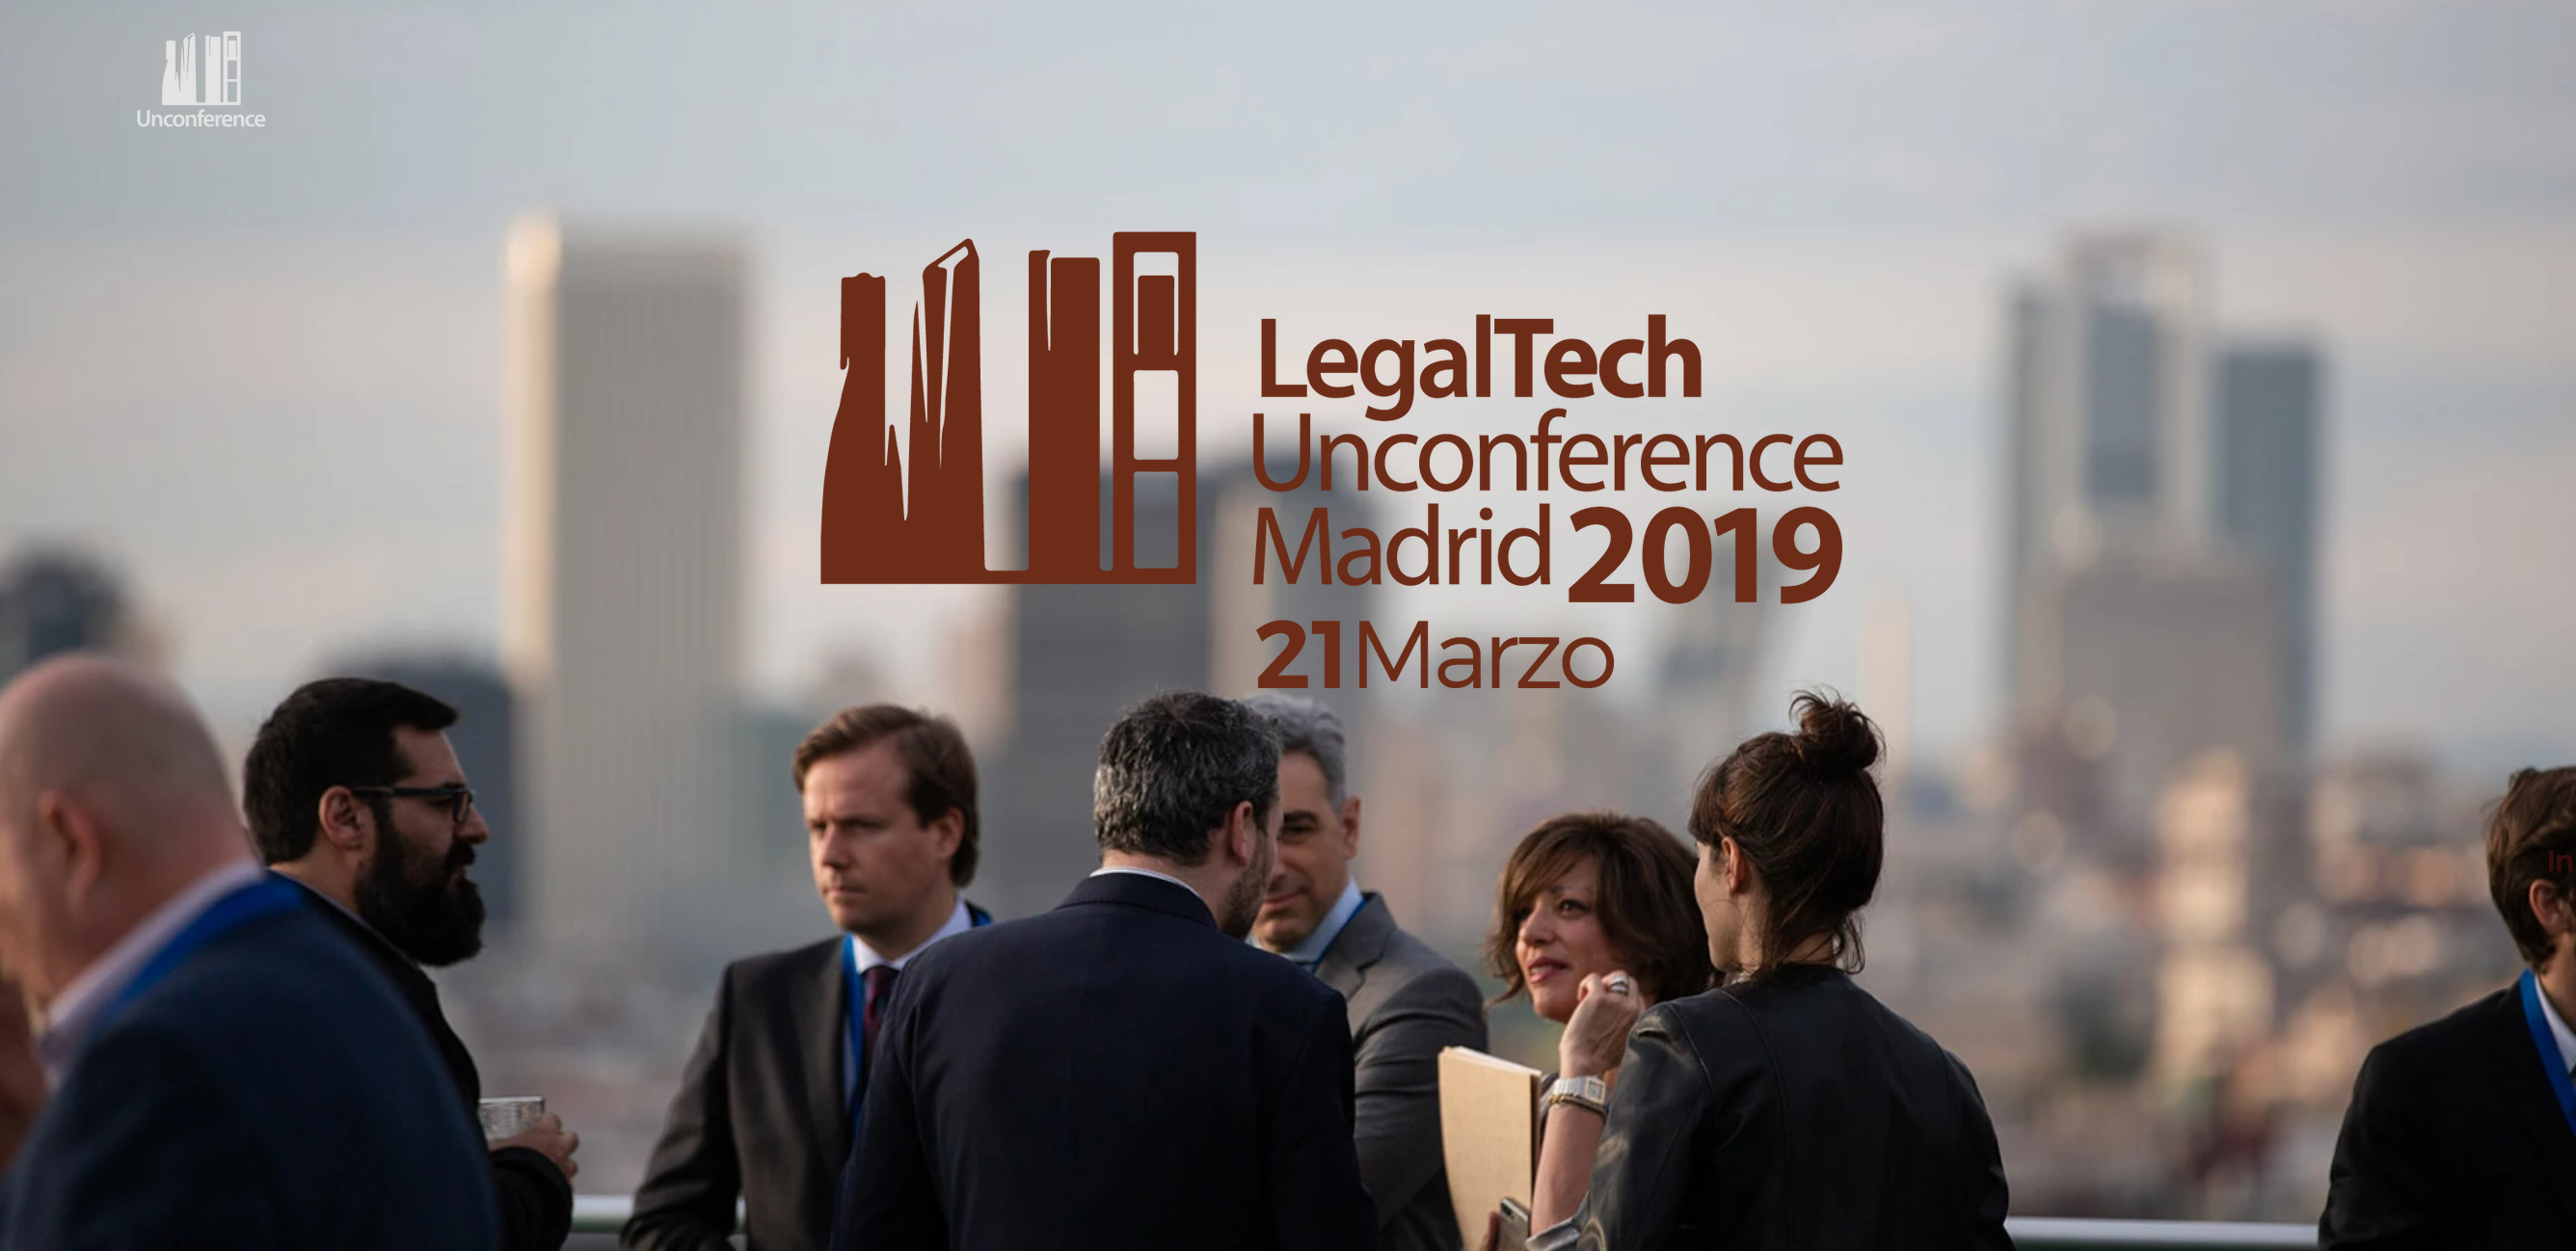 Legaltech Unconference Madrid 2019